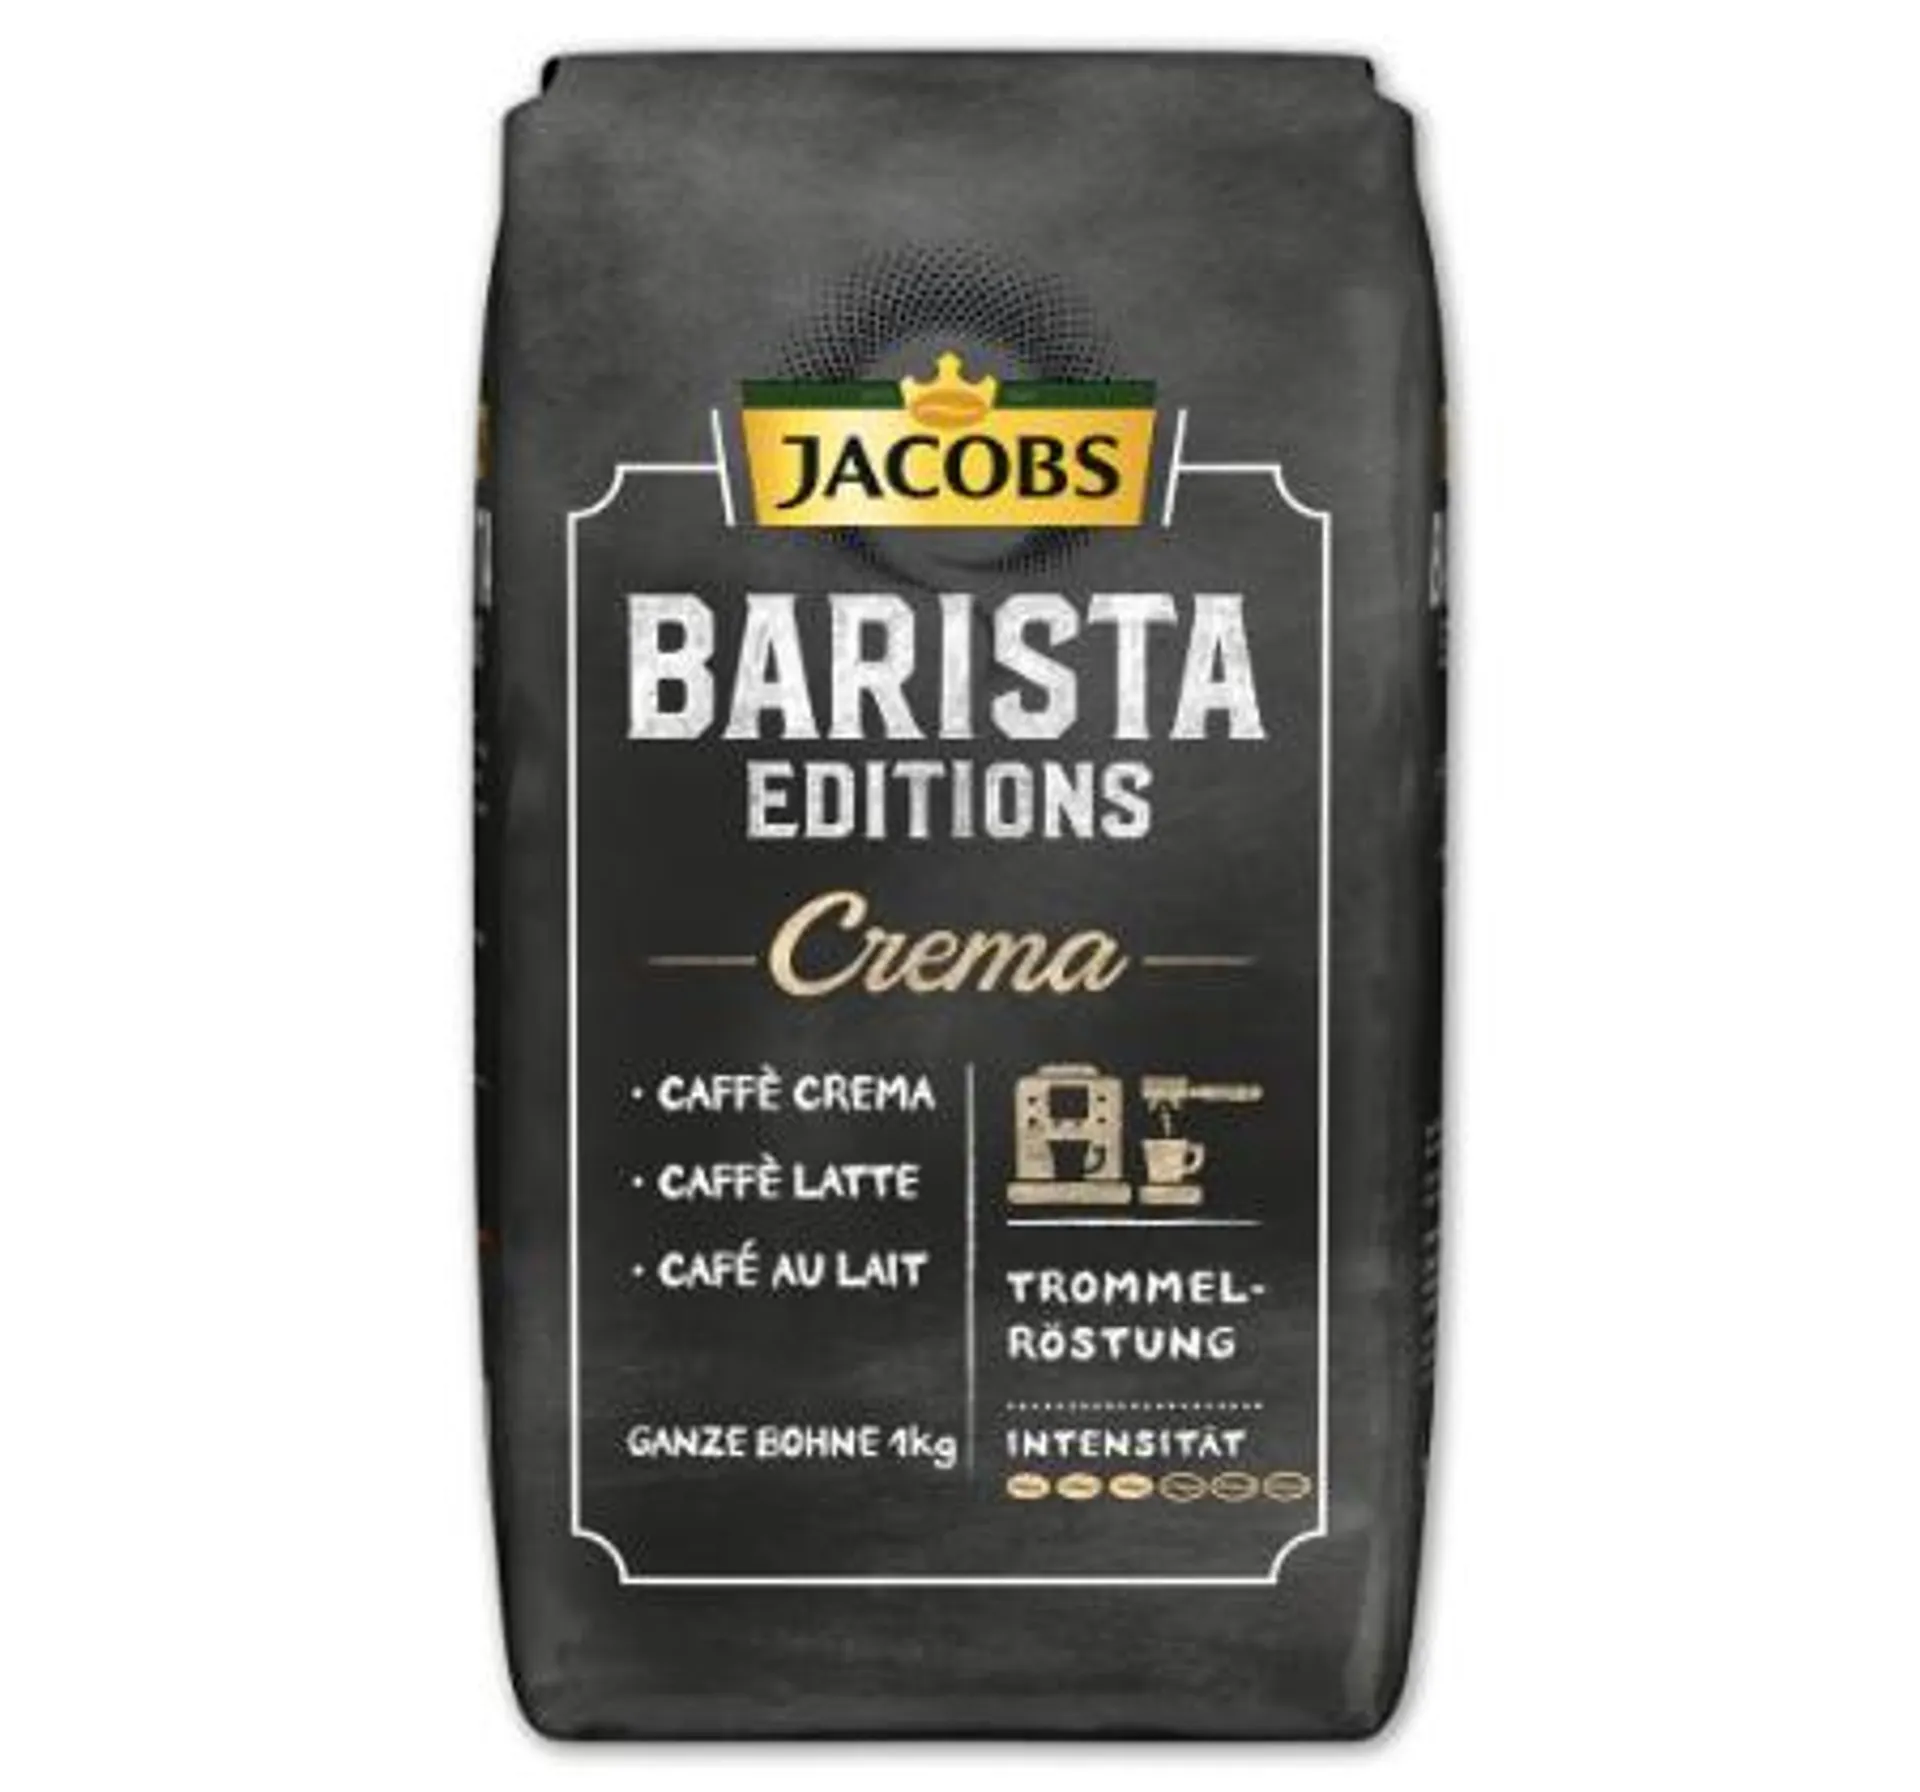 JACOBS Barista Editions*